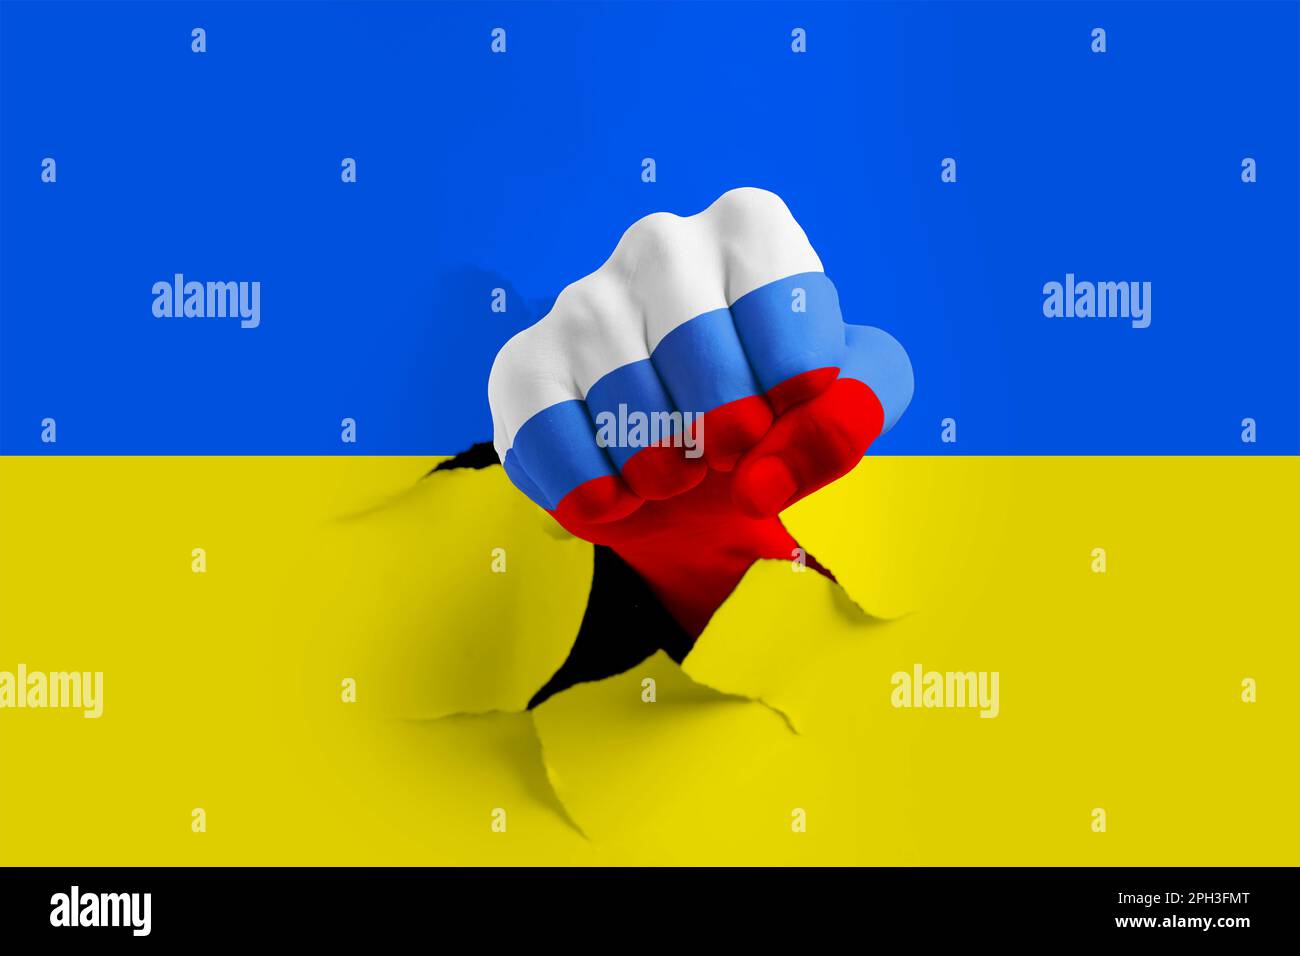 Russian invasion of Ukraine. Man breaking through paper Ukrainian flag with fist painted in colors of Russian flag Stock Photo